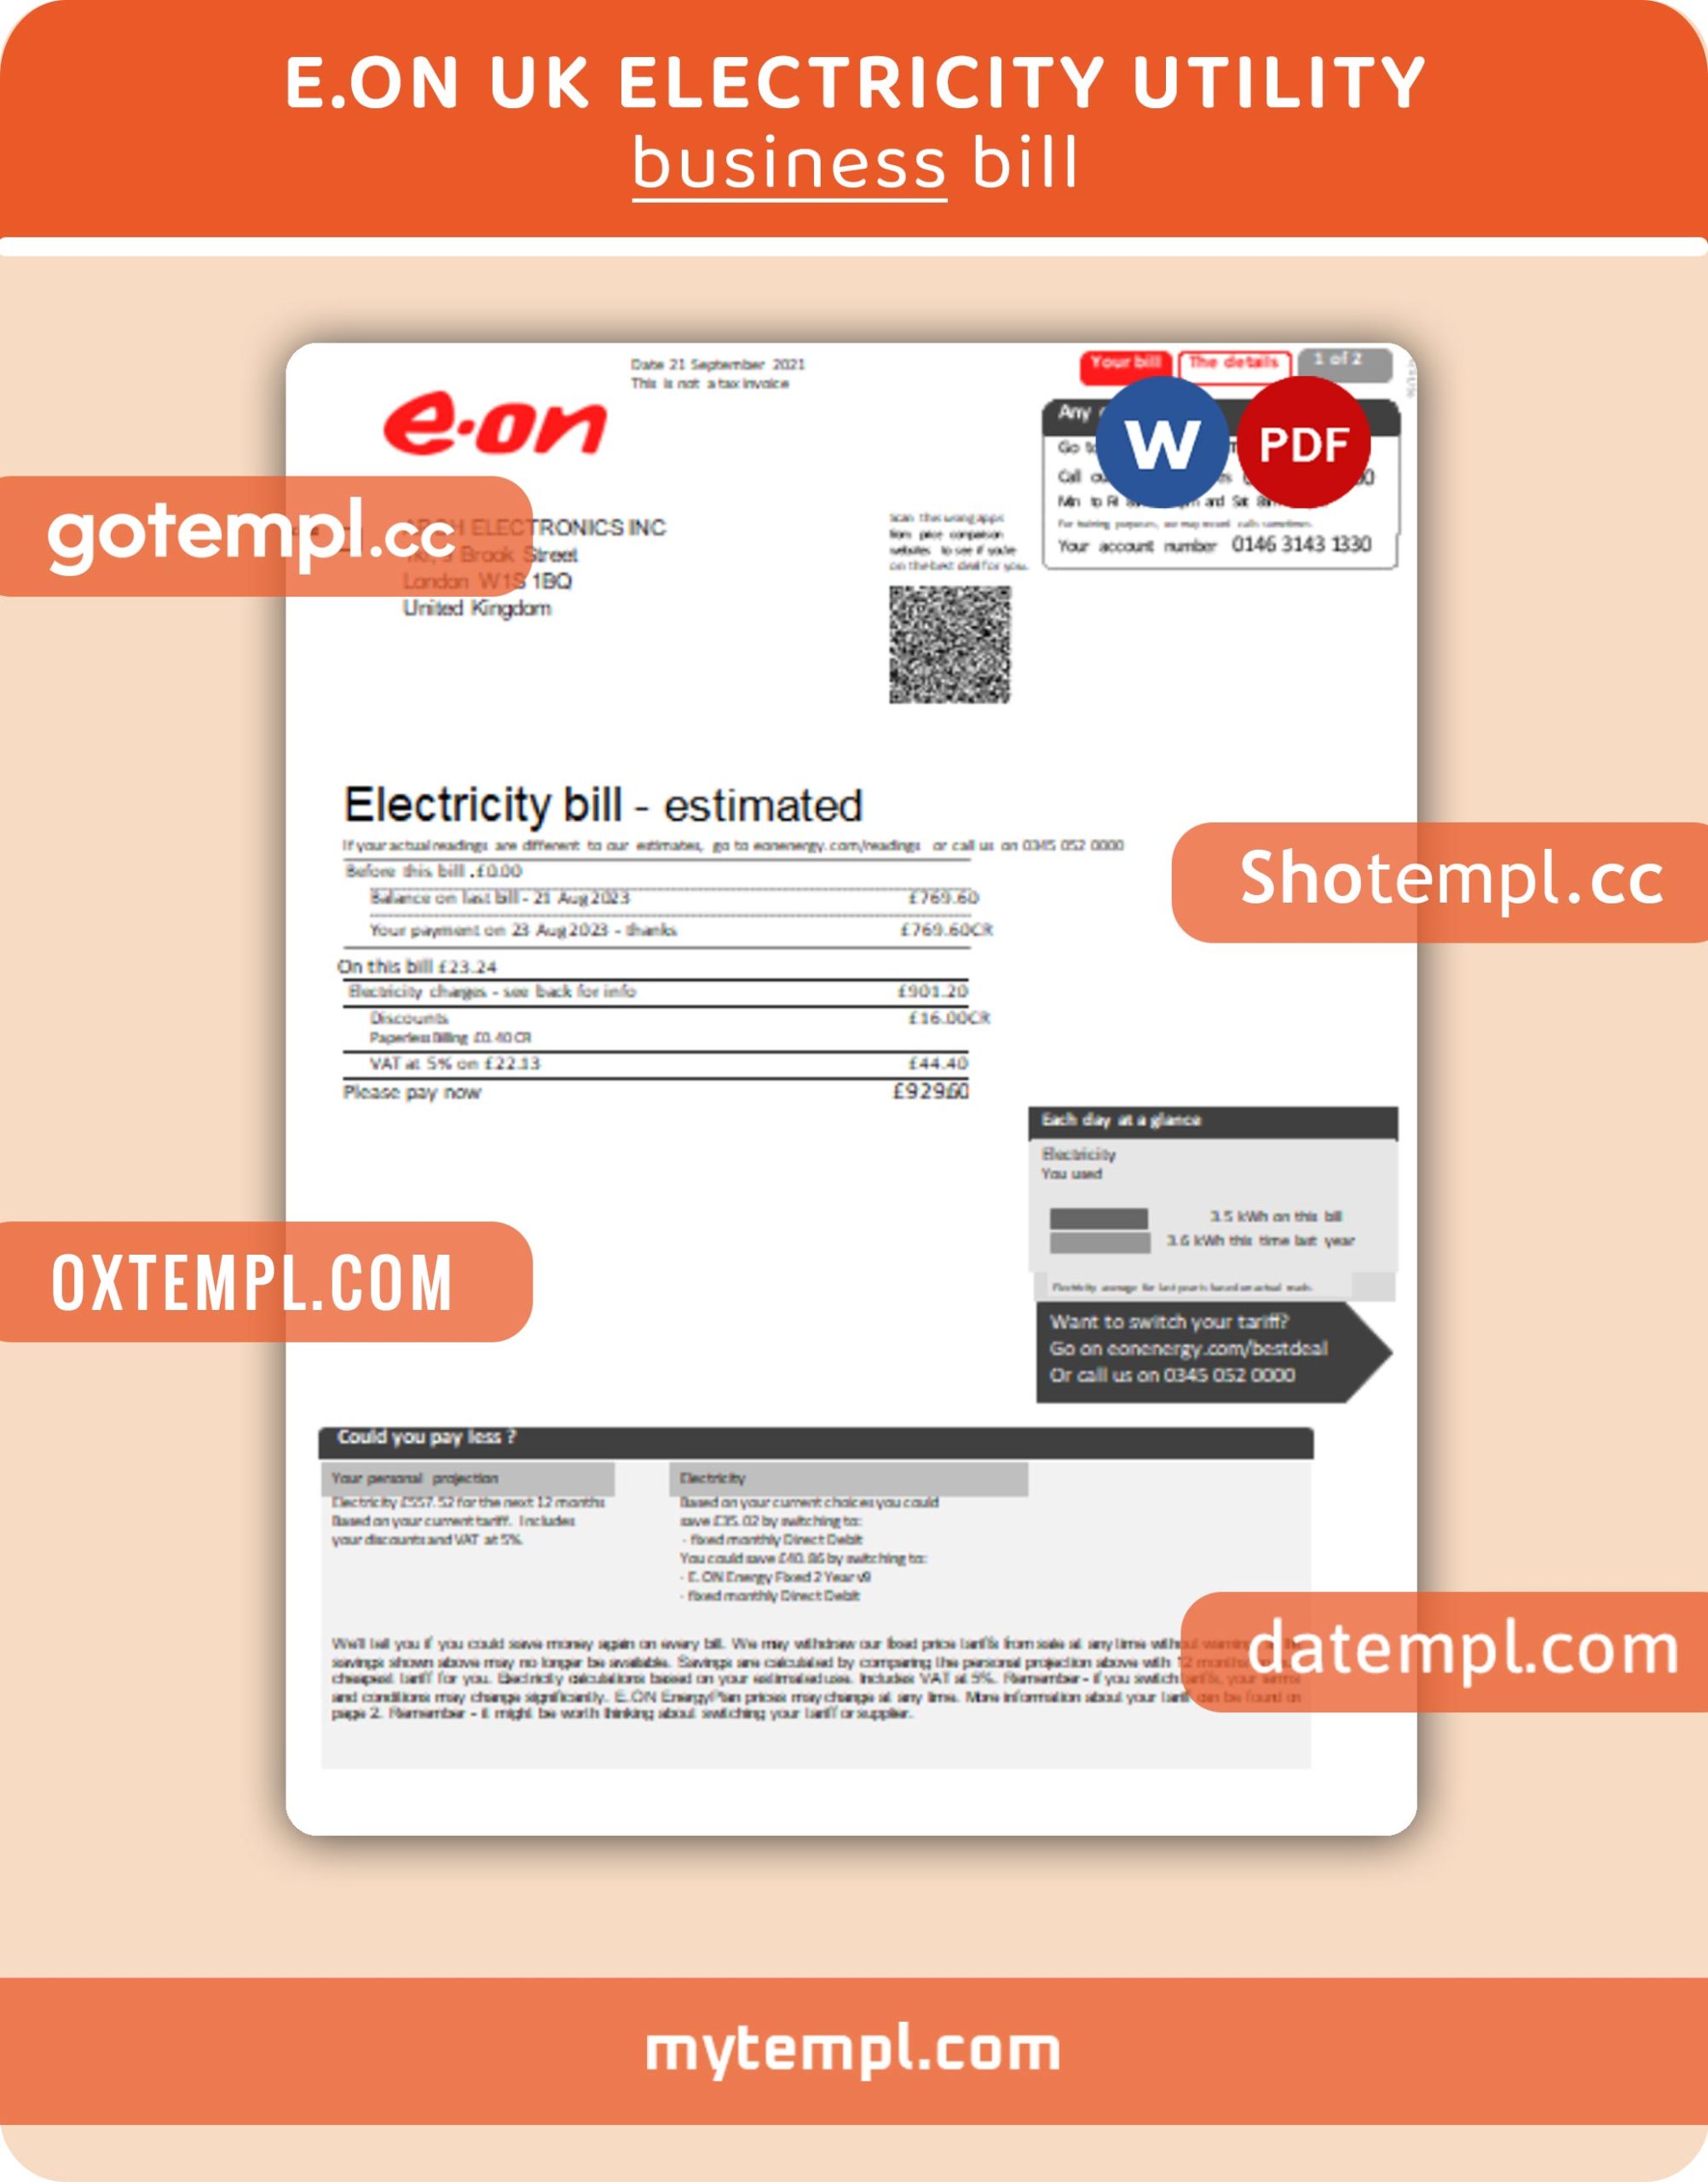 E.on UK electricity business utility bill, Word and PDF template